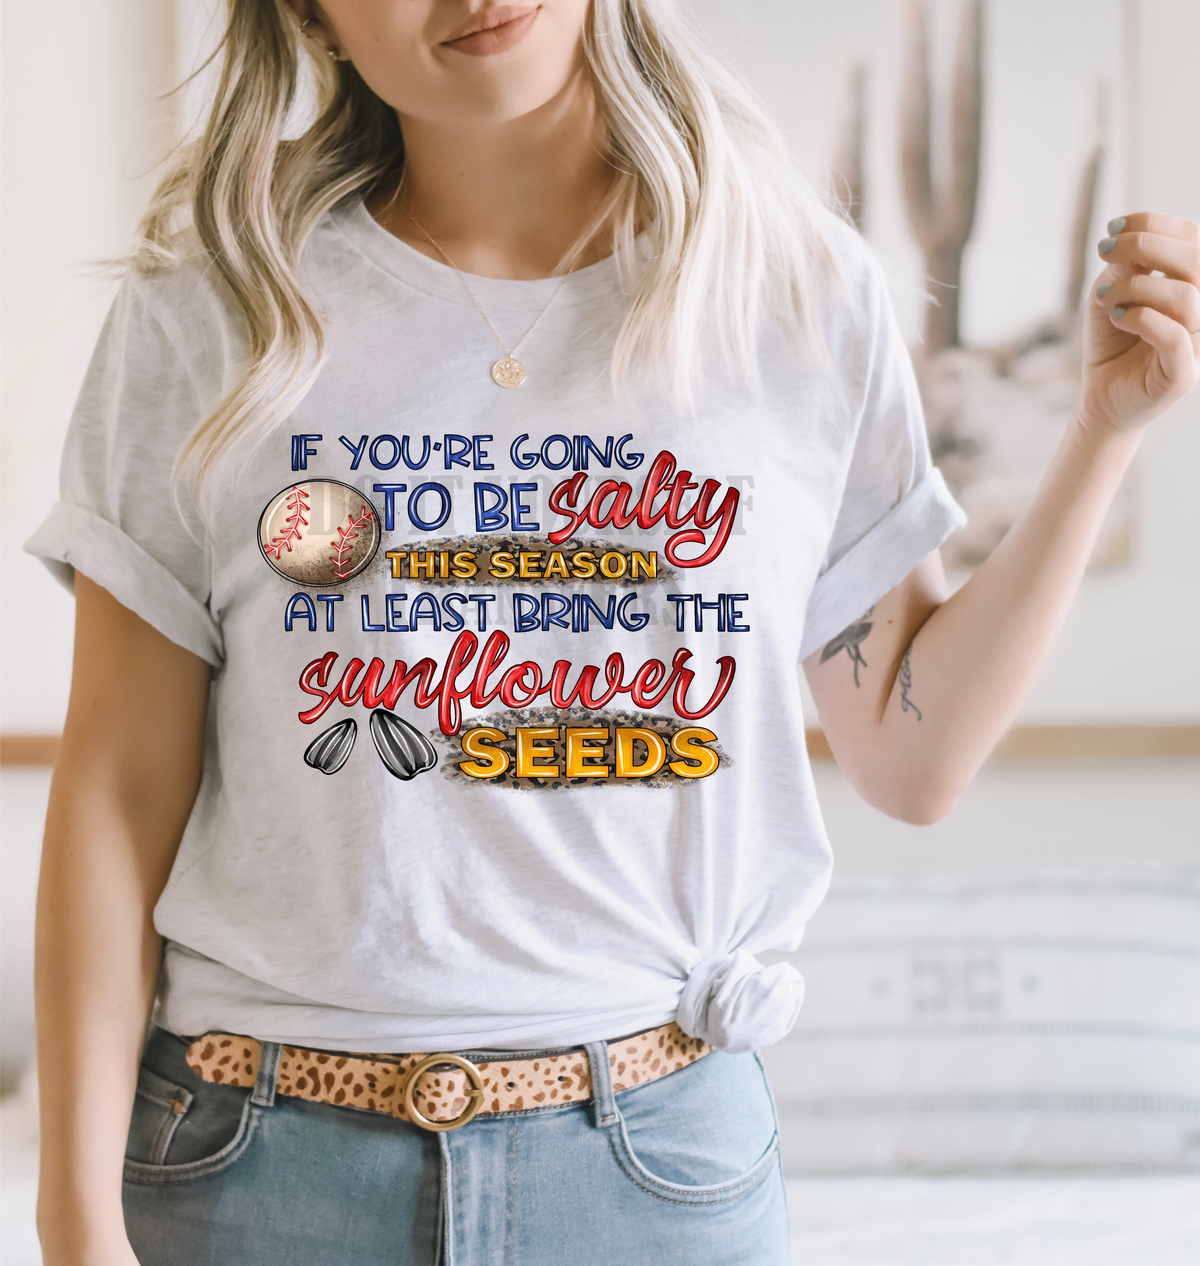 If you're going to be salty this season at least bring the sunflower seeds Baseball  ADULT size .2 DTF TRANSFERPRINT TO ORDER